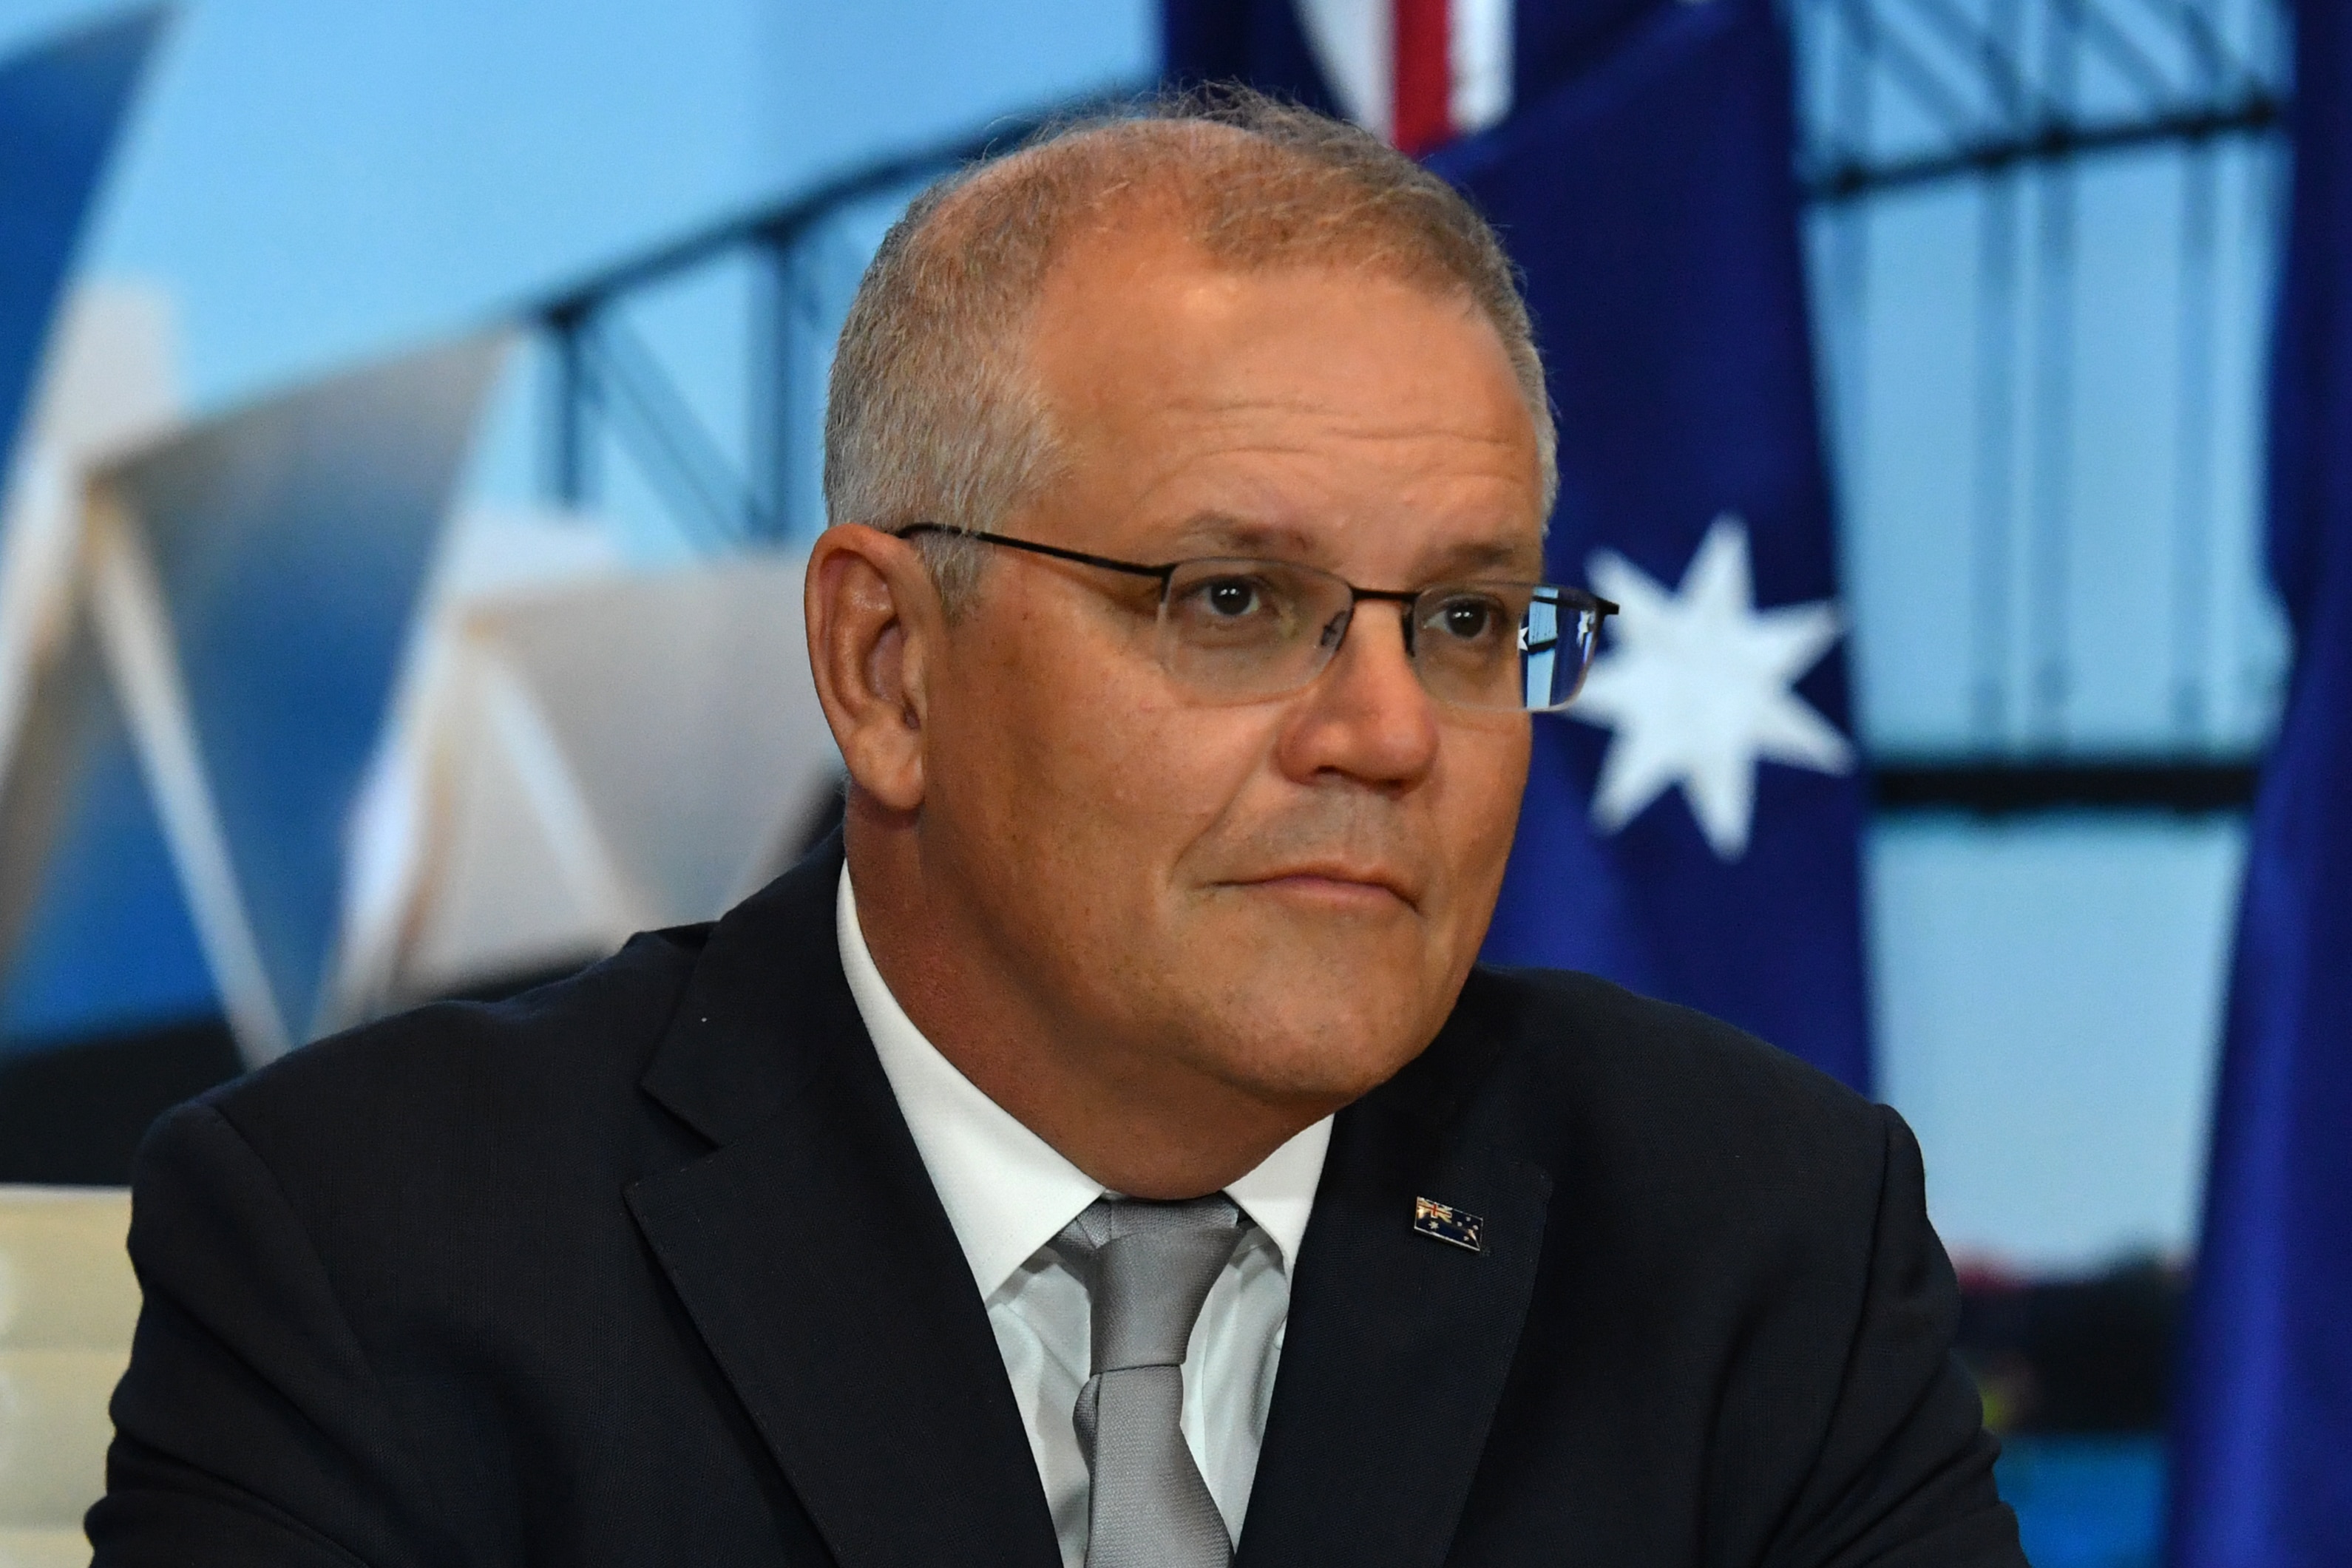 Scott Morrison at the Leader's Summit on Climate.